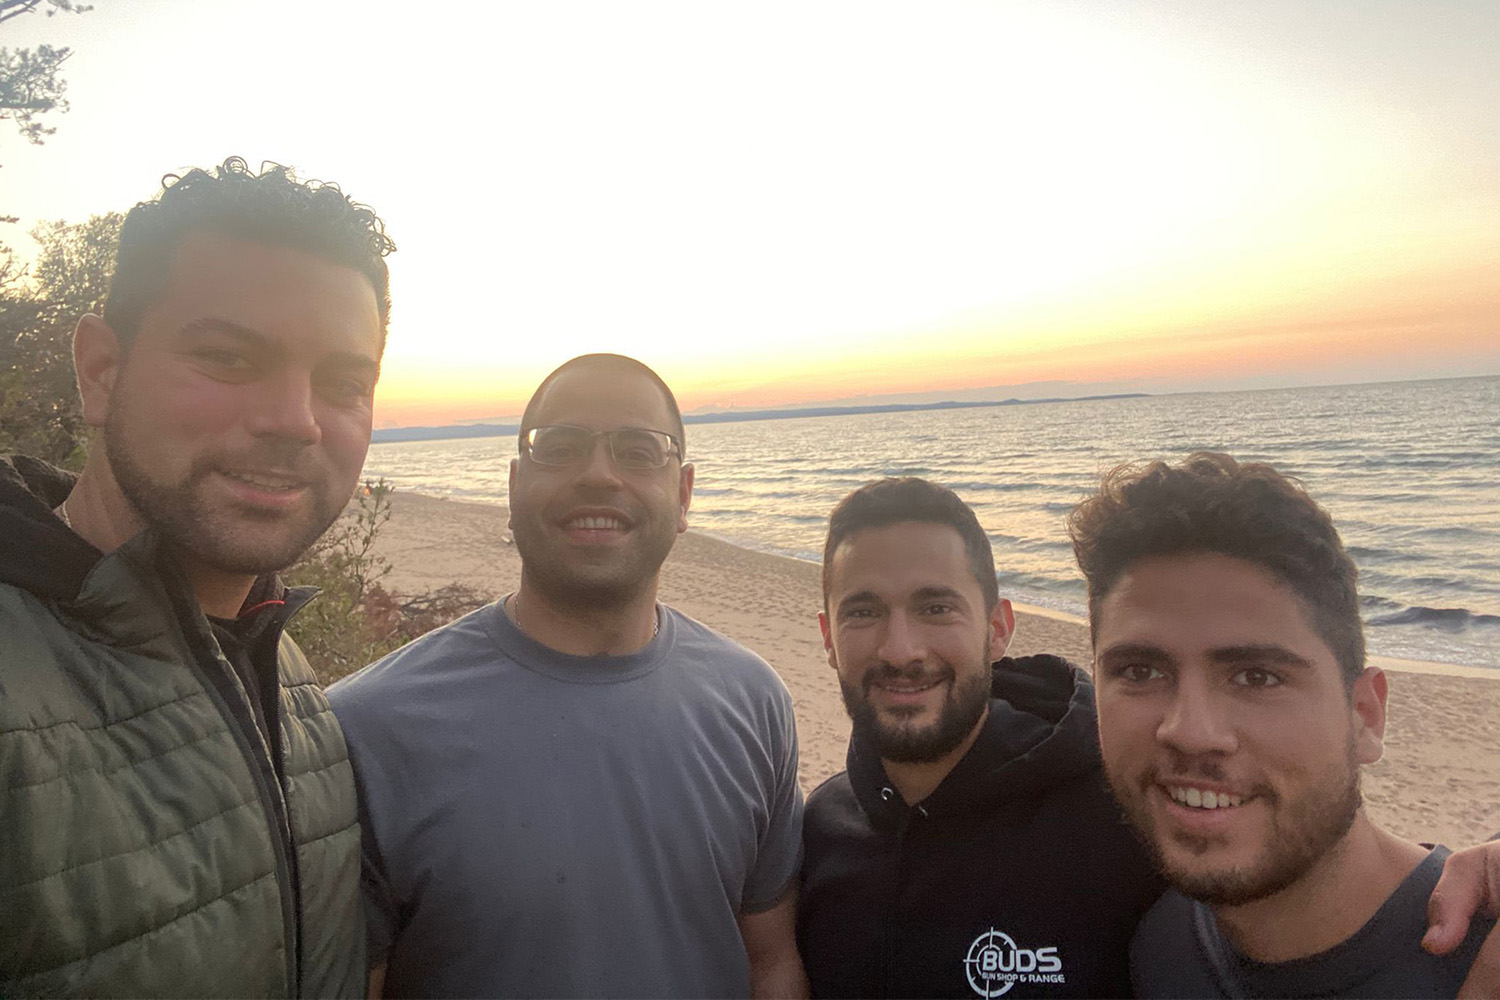 Marc Habre with friends at the beach in Saudi Arabia